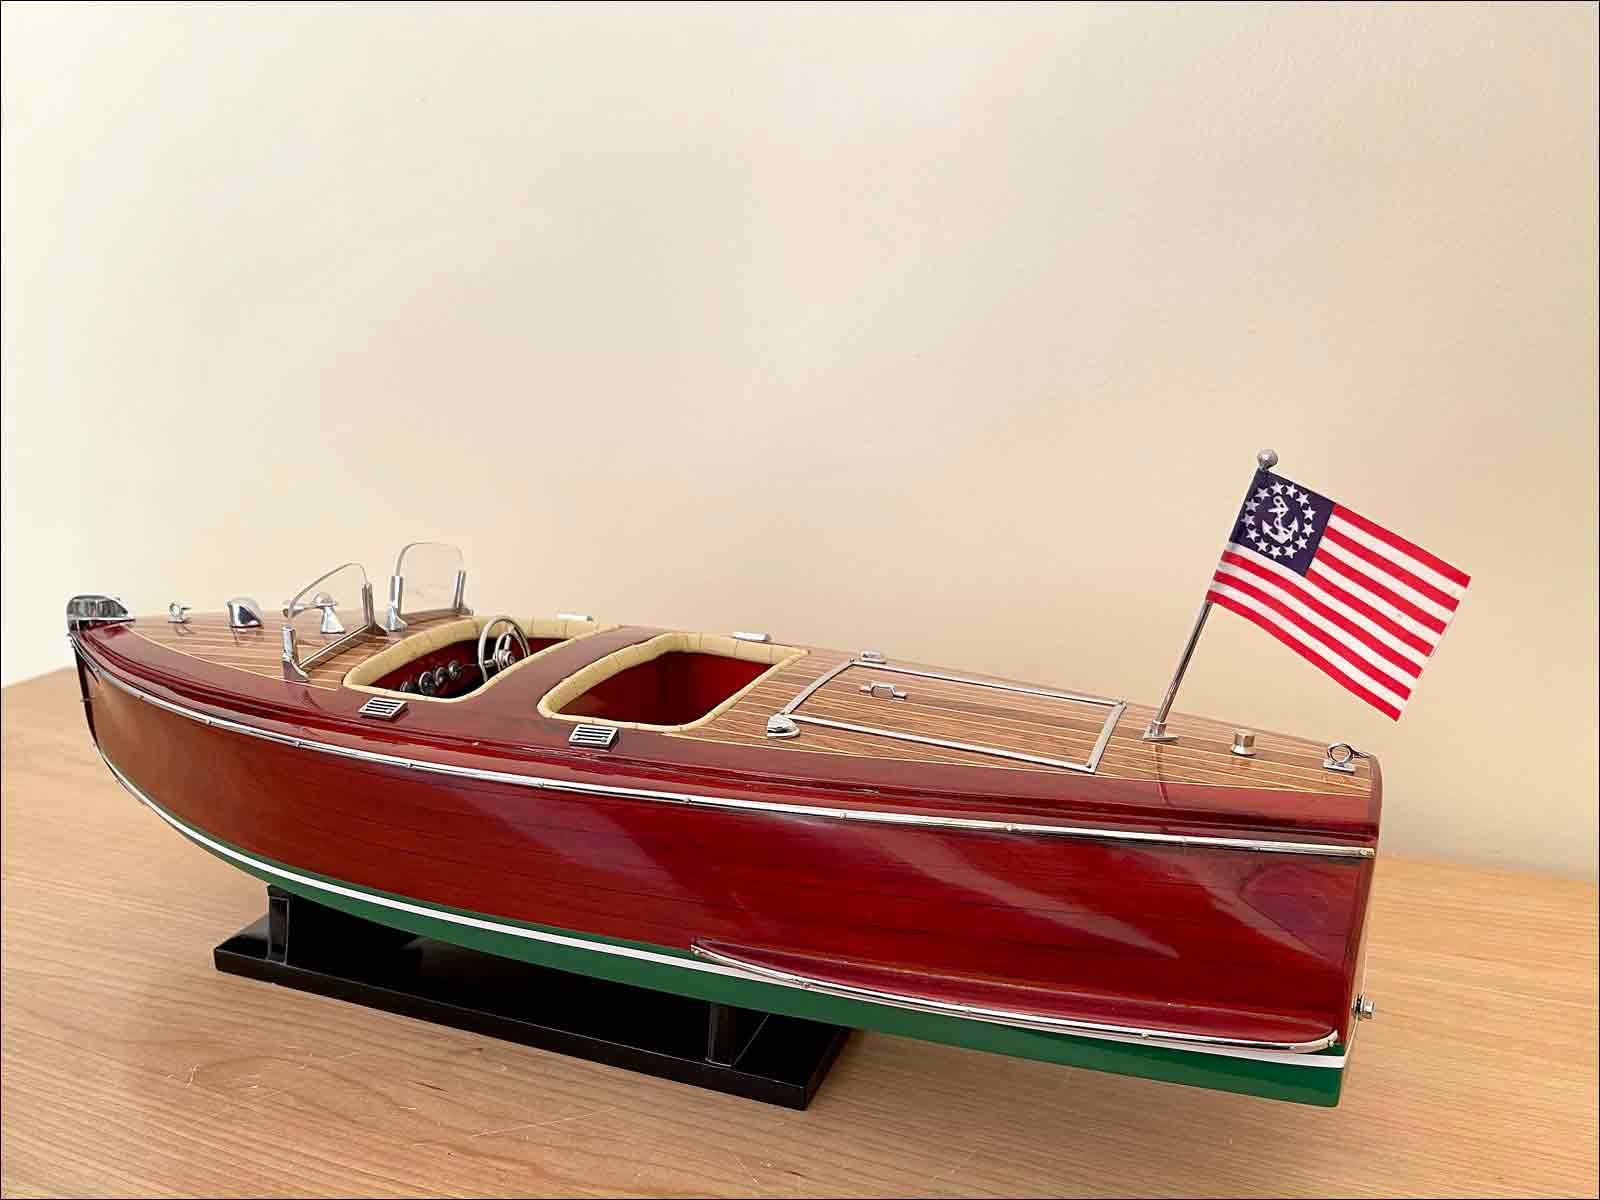 Chris Craft Runabout model small scale boat